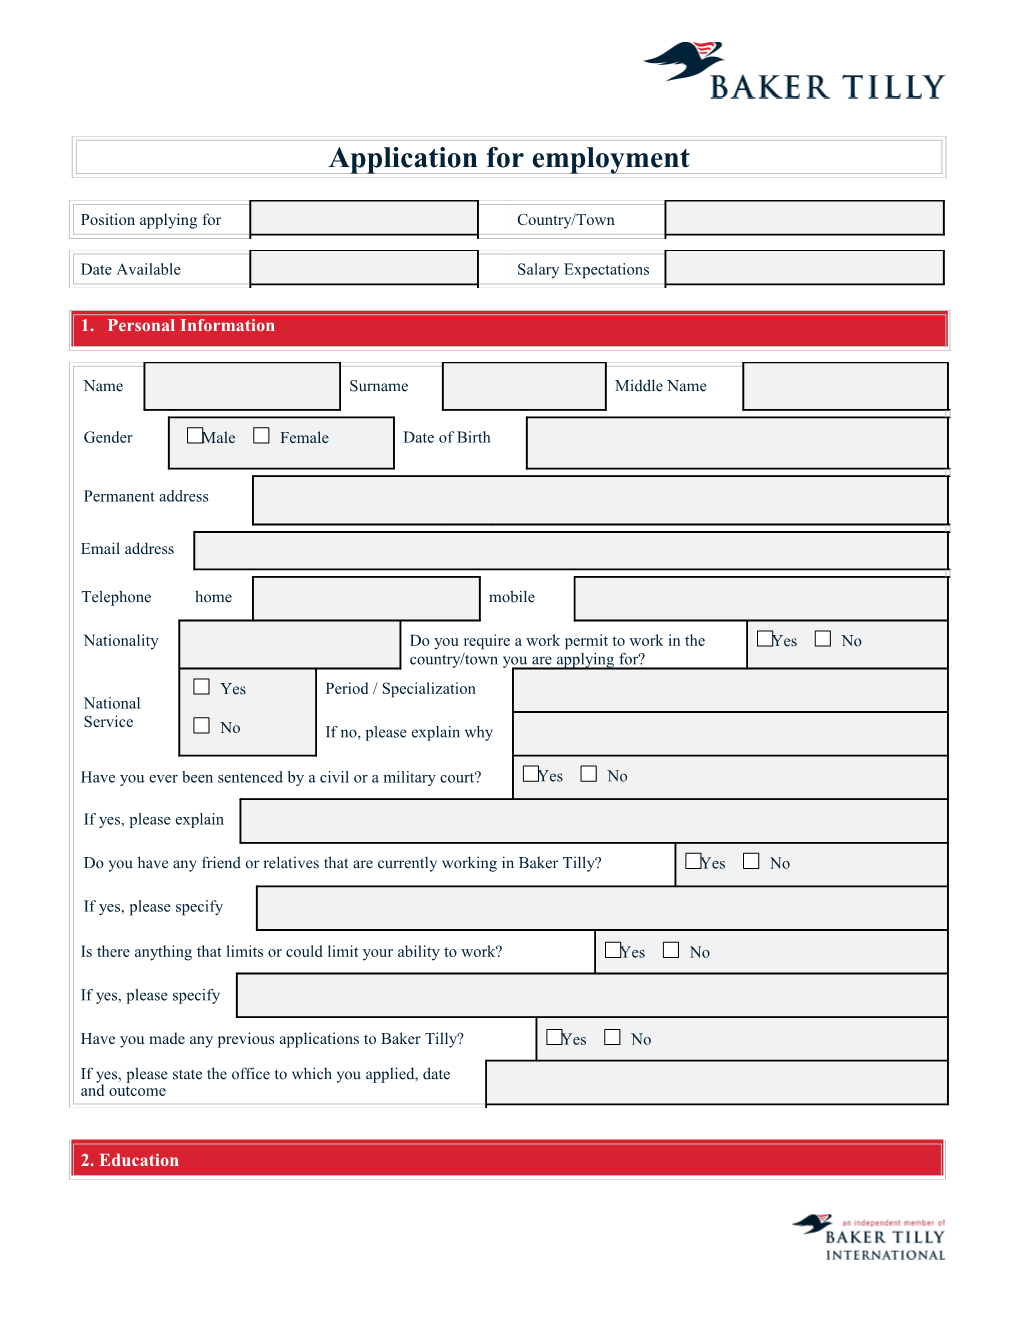 Application for Employment s70